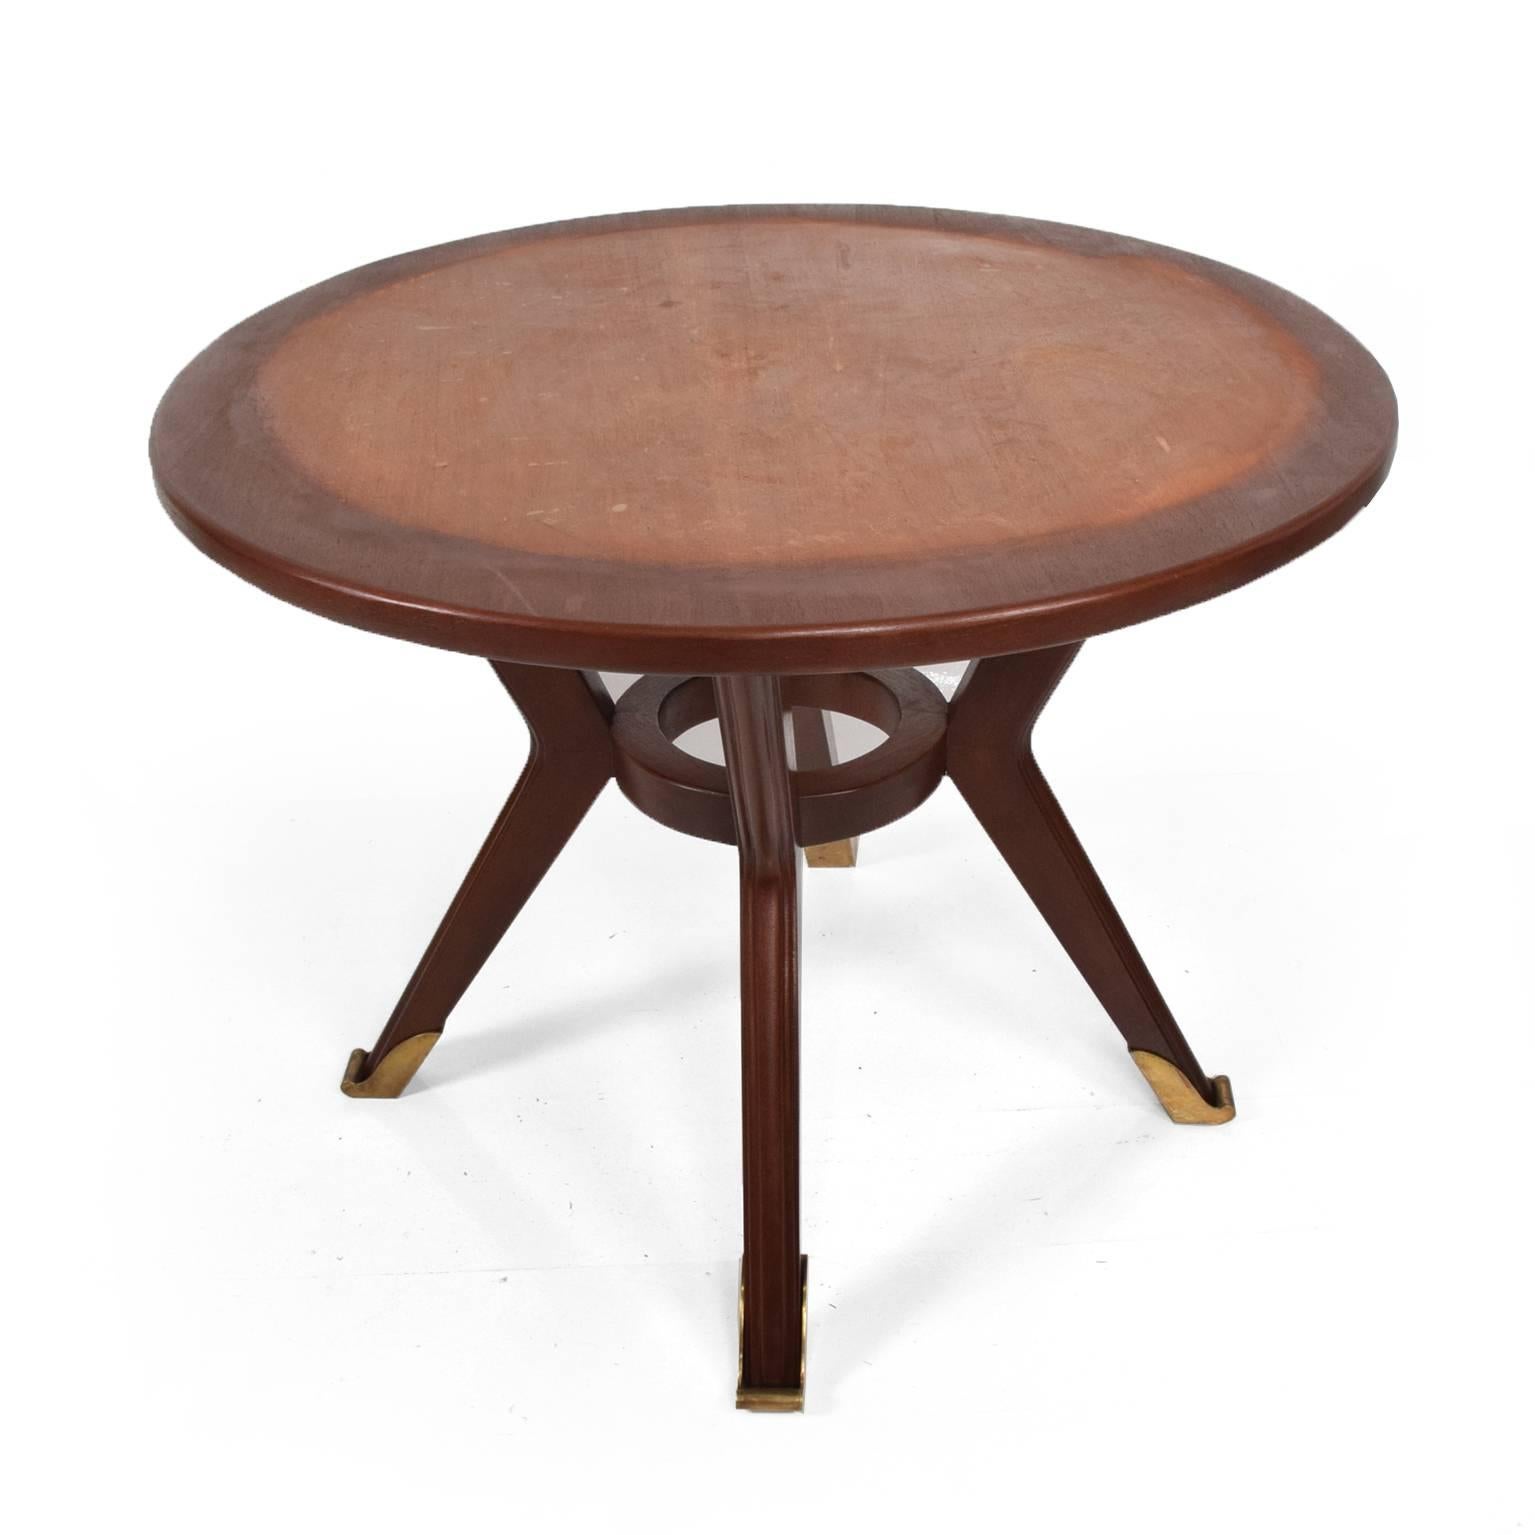 For your consideration, a sculptural dining table in mahogany wood with sculptural brass sabots, 
Mexico, circa 1950s. 
The table has a marble top (not in the picture).
Dimensions: 29 5/8